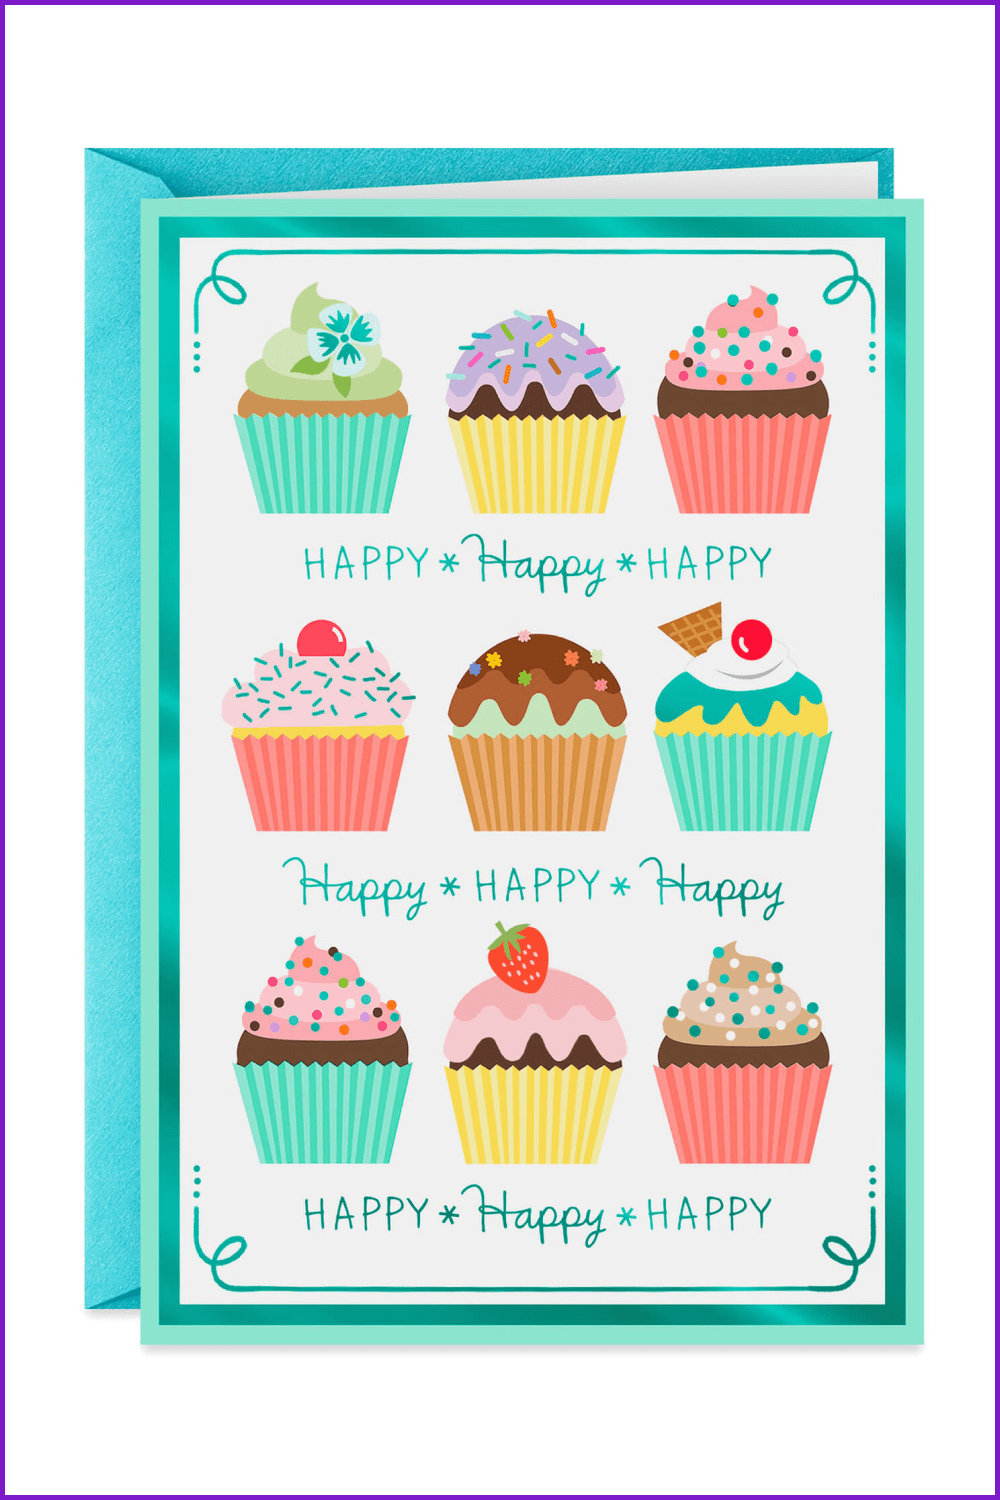 Green postcard with the image of painted cupcakes with different fillings.